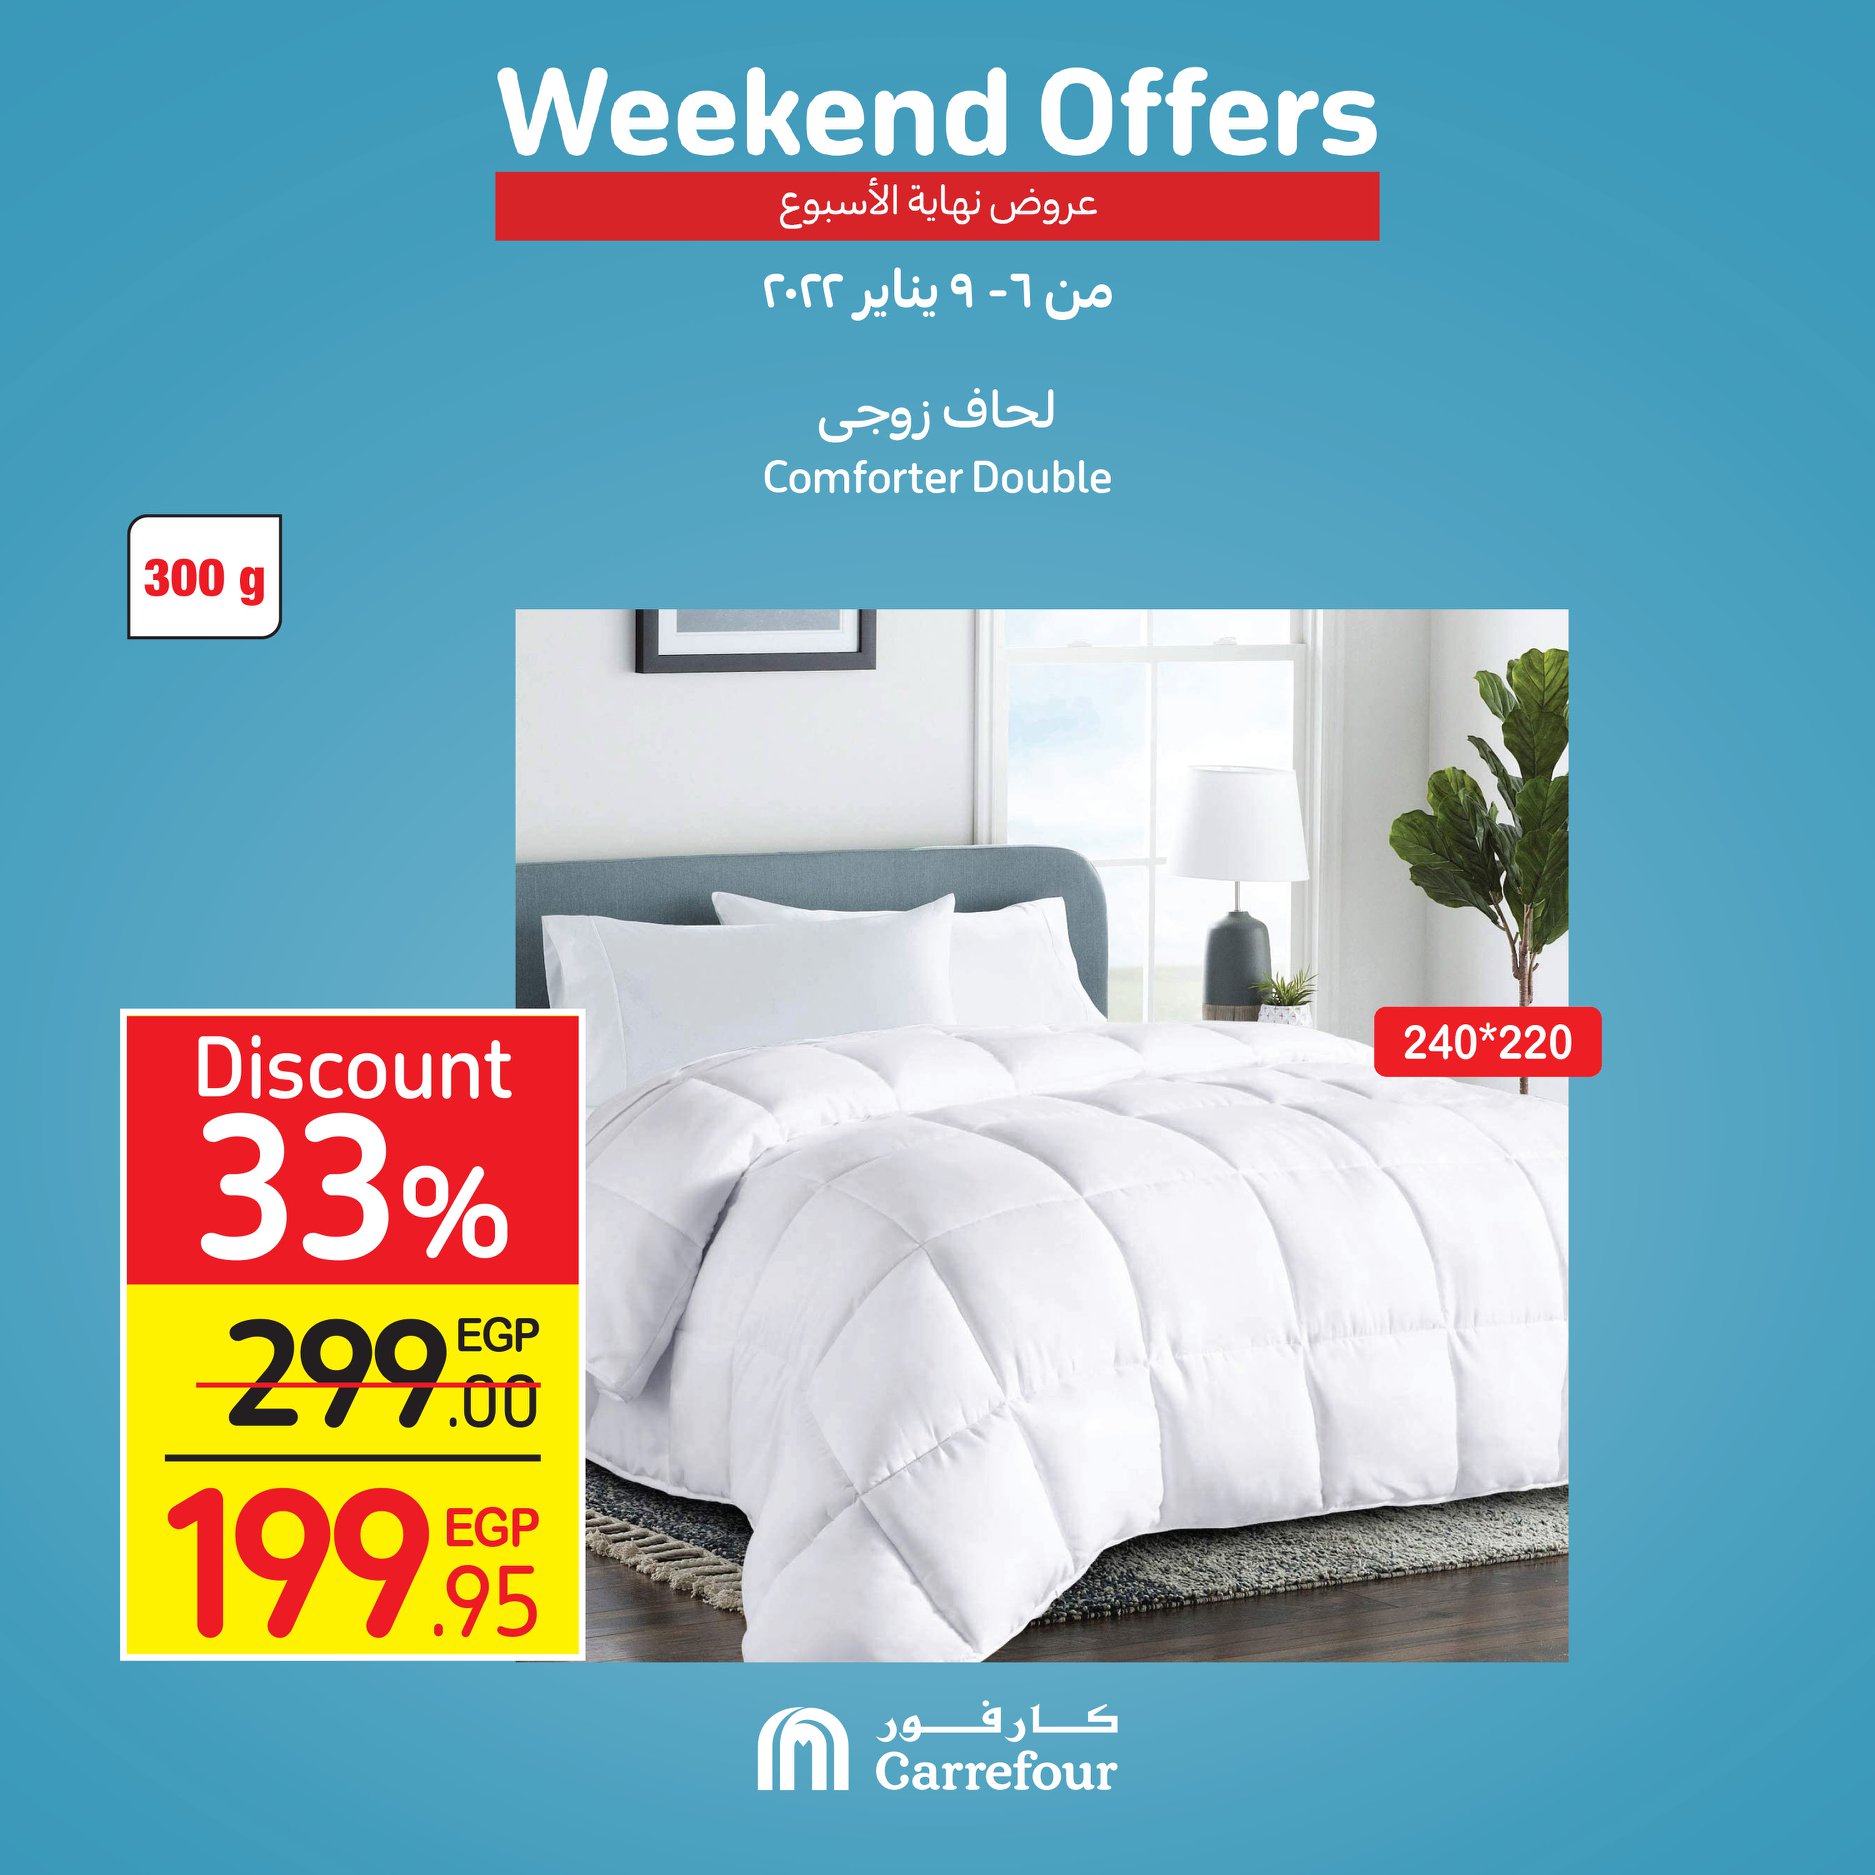 Now, the strongest offers and surprises from Carrefour, half-price discounts, at Weekend until January 16th, 40